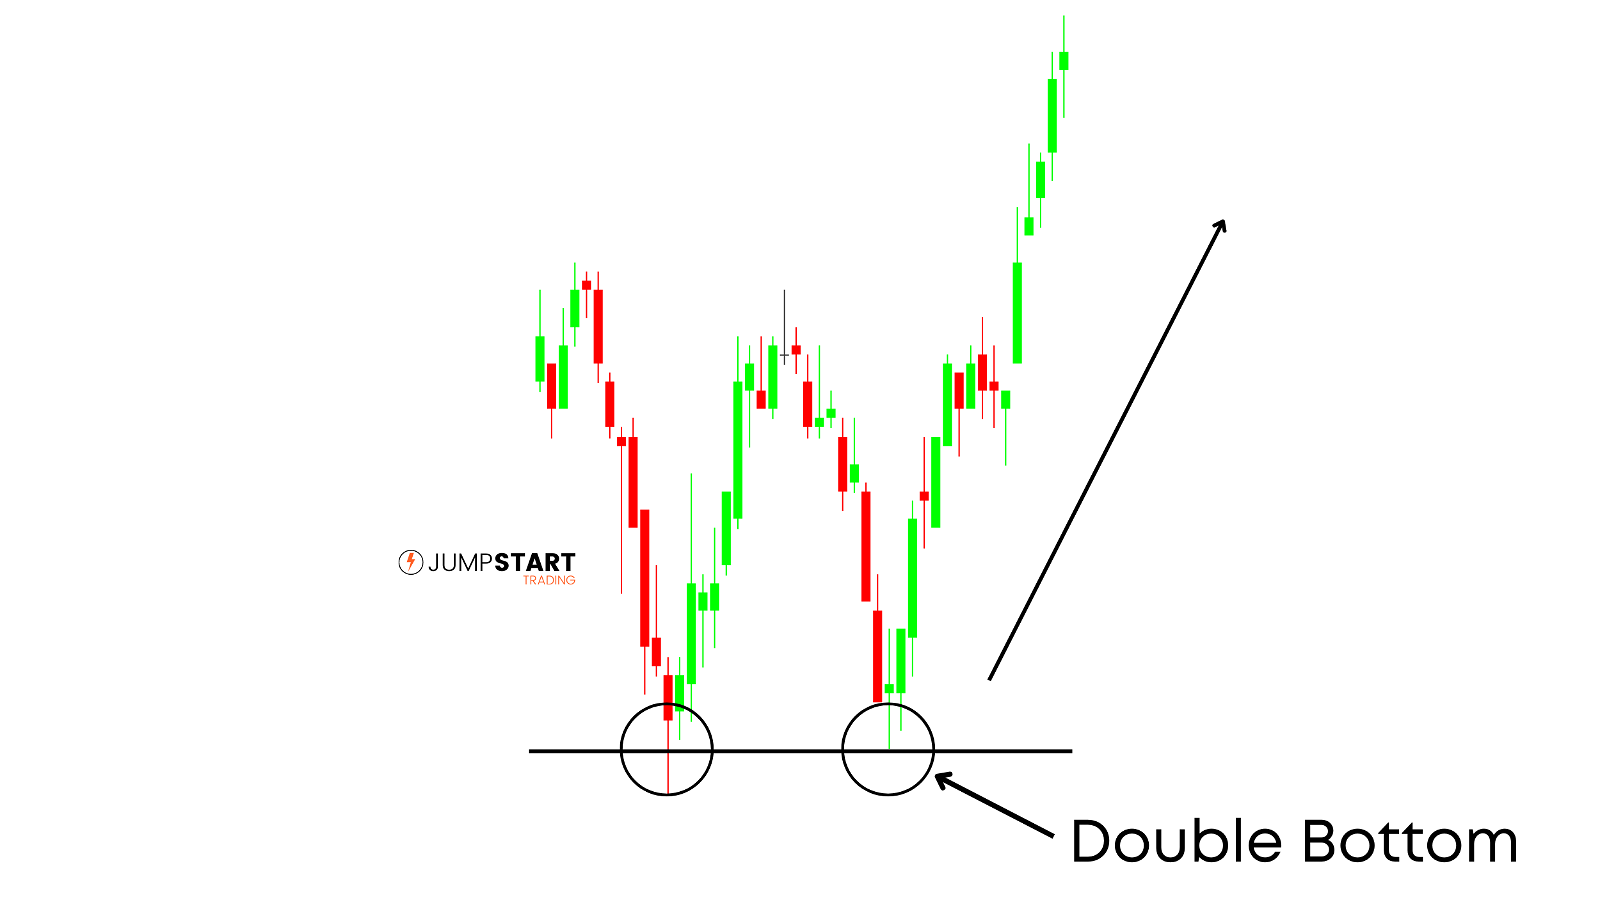 Price forming a double bottom then rallying